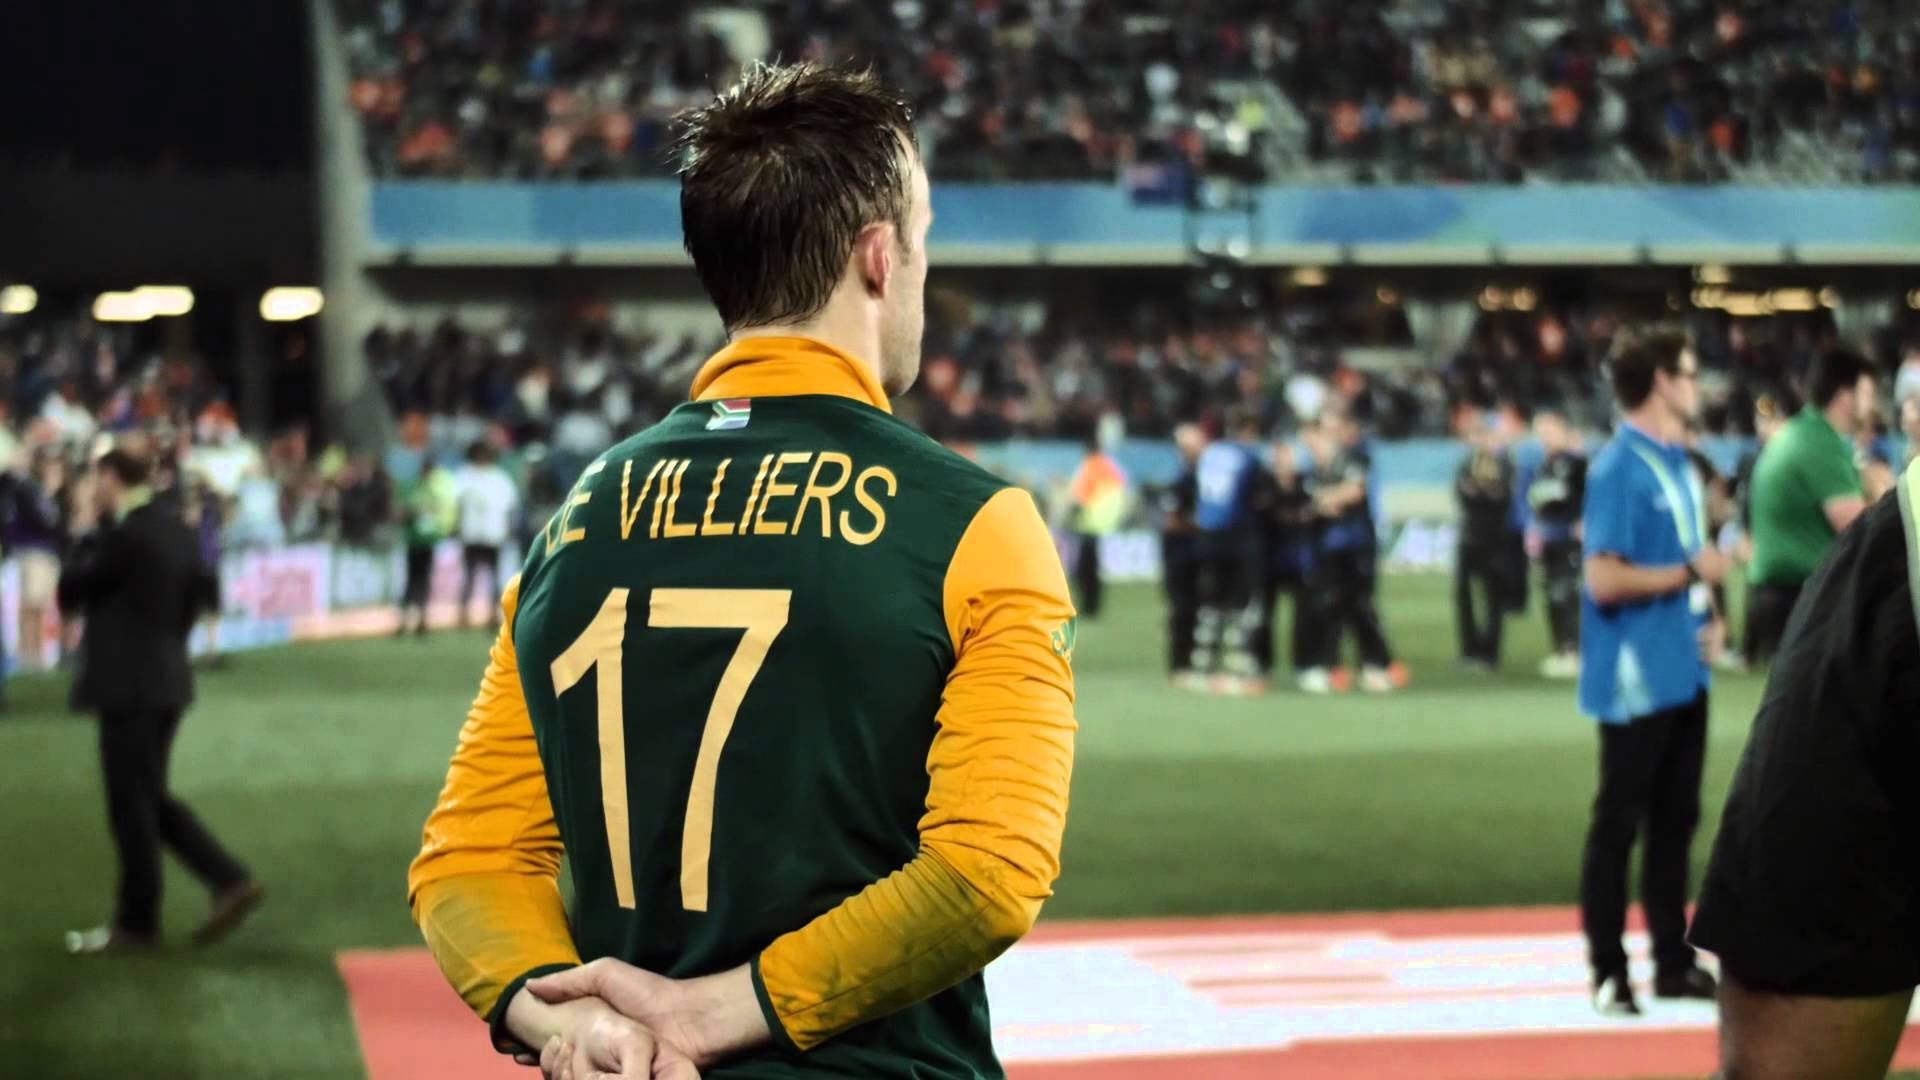 Top 999+ Ab De Villiers Wallpapers Full HD, 4K✅Free to Use